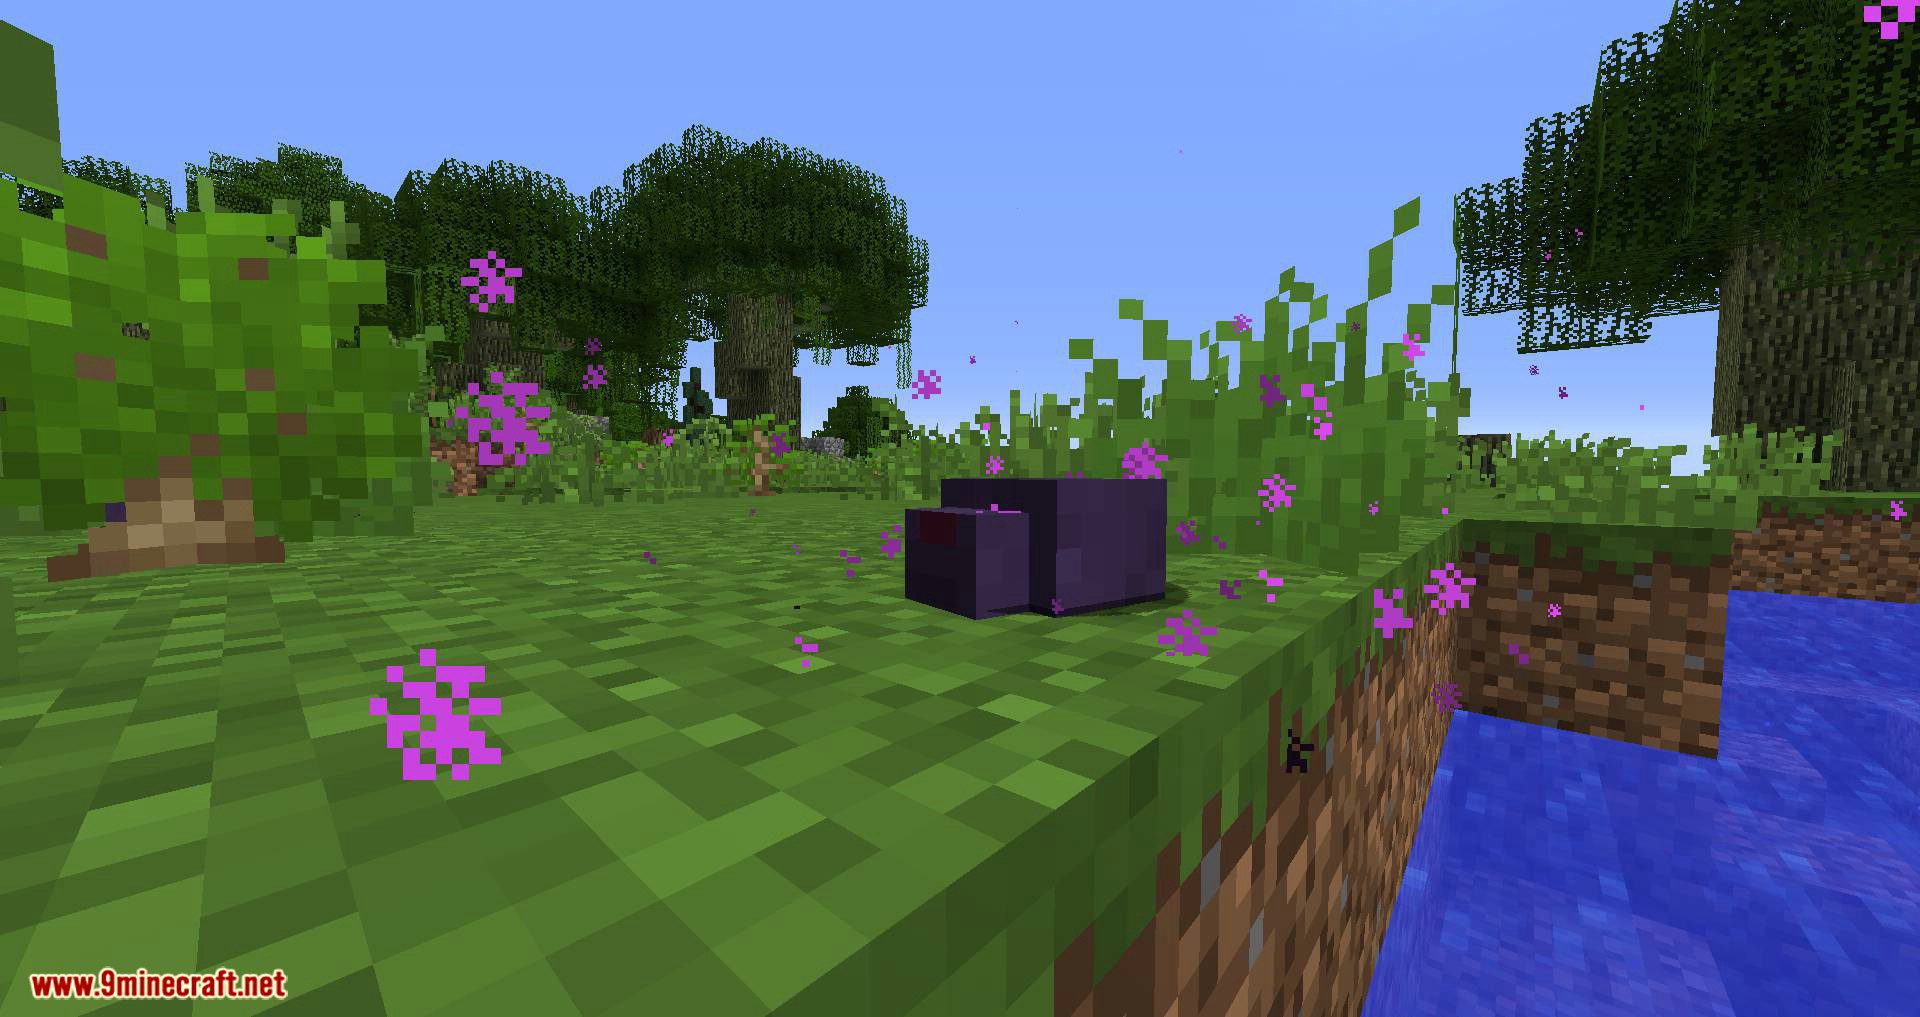 Friendly Endermite Mod 1 15 2 1 12 2 Enderman Will Not Attack